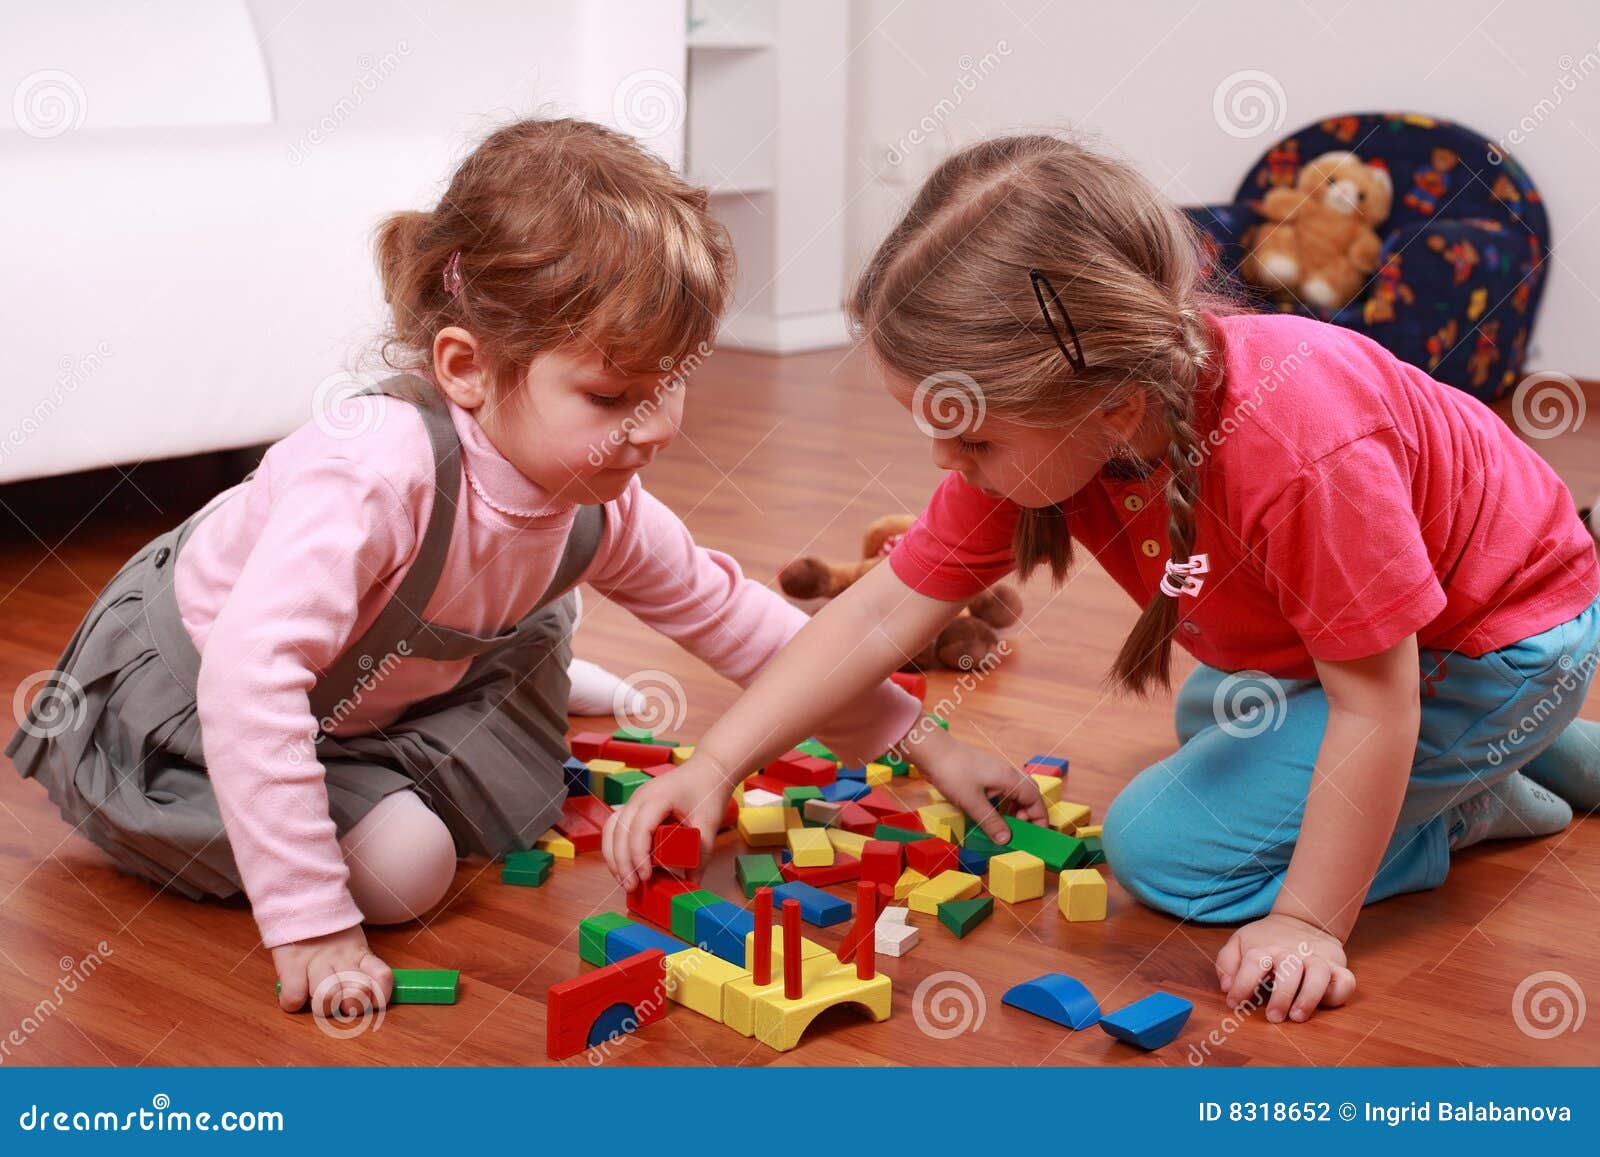 adorable kids playing with blocks